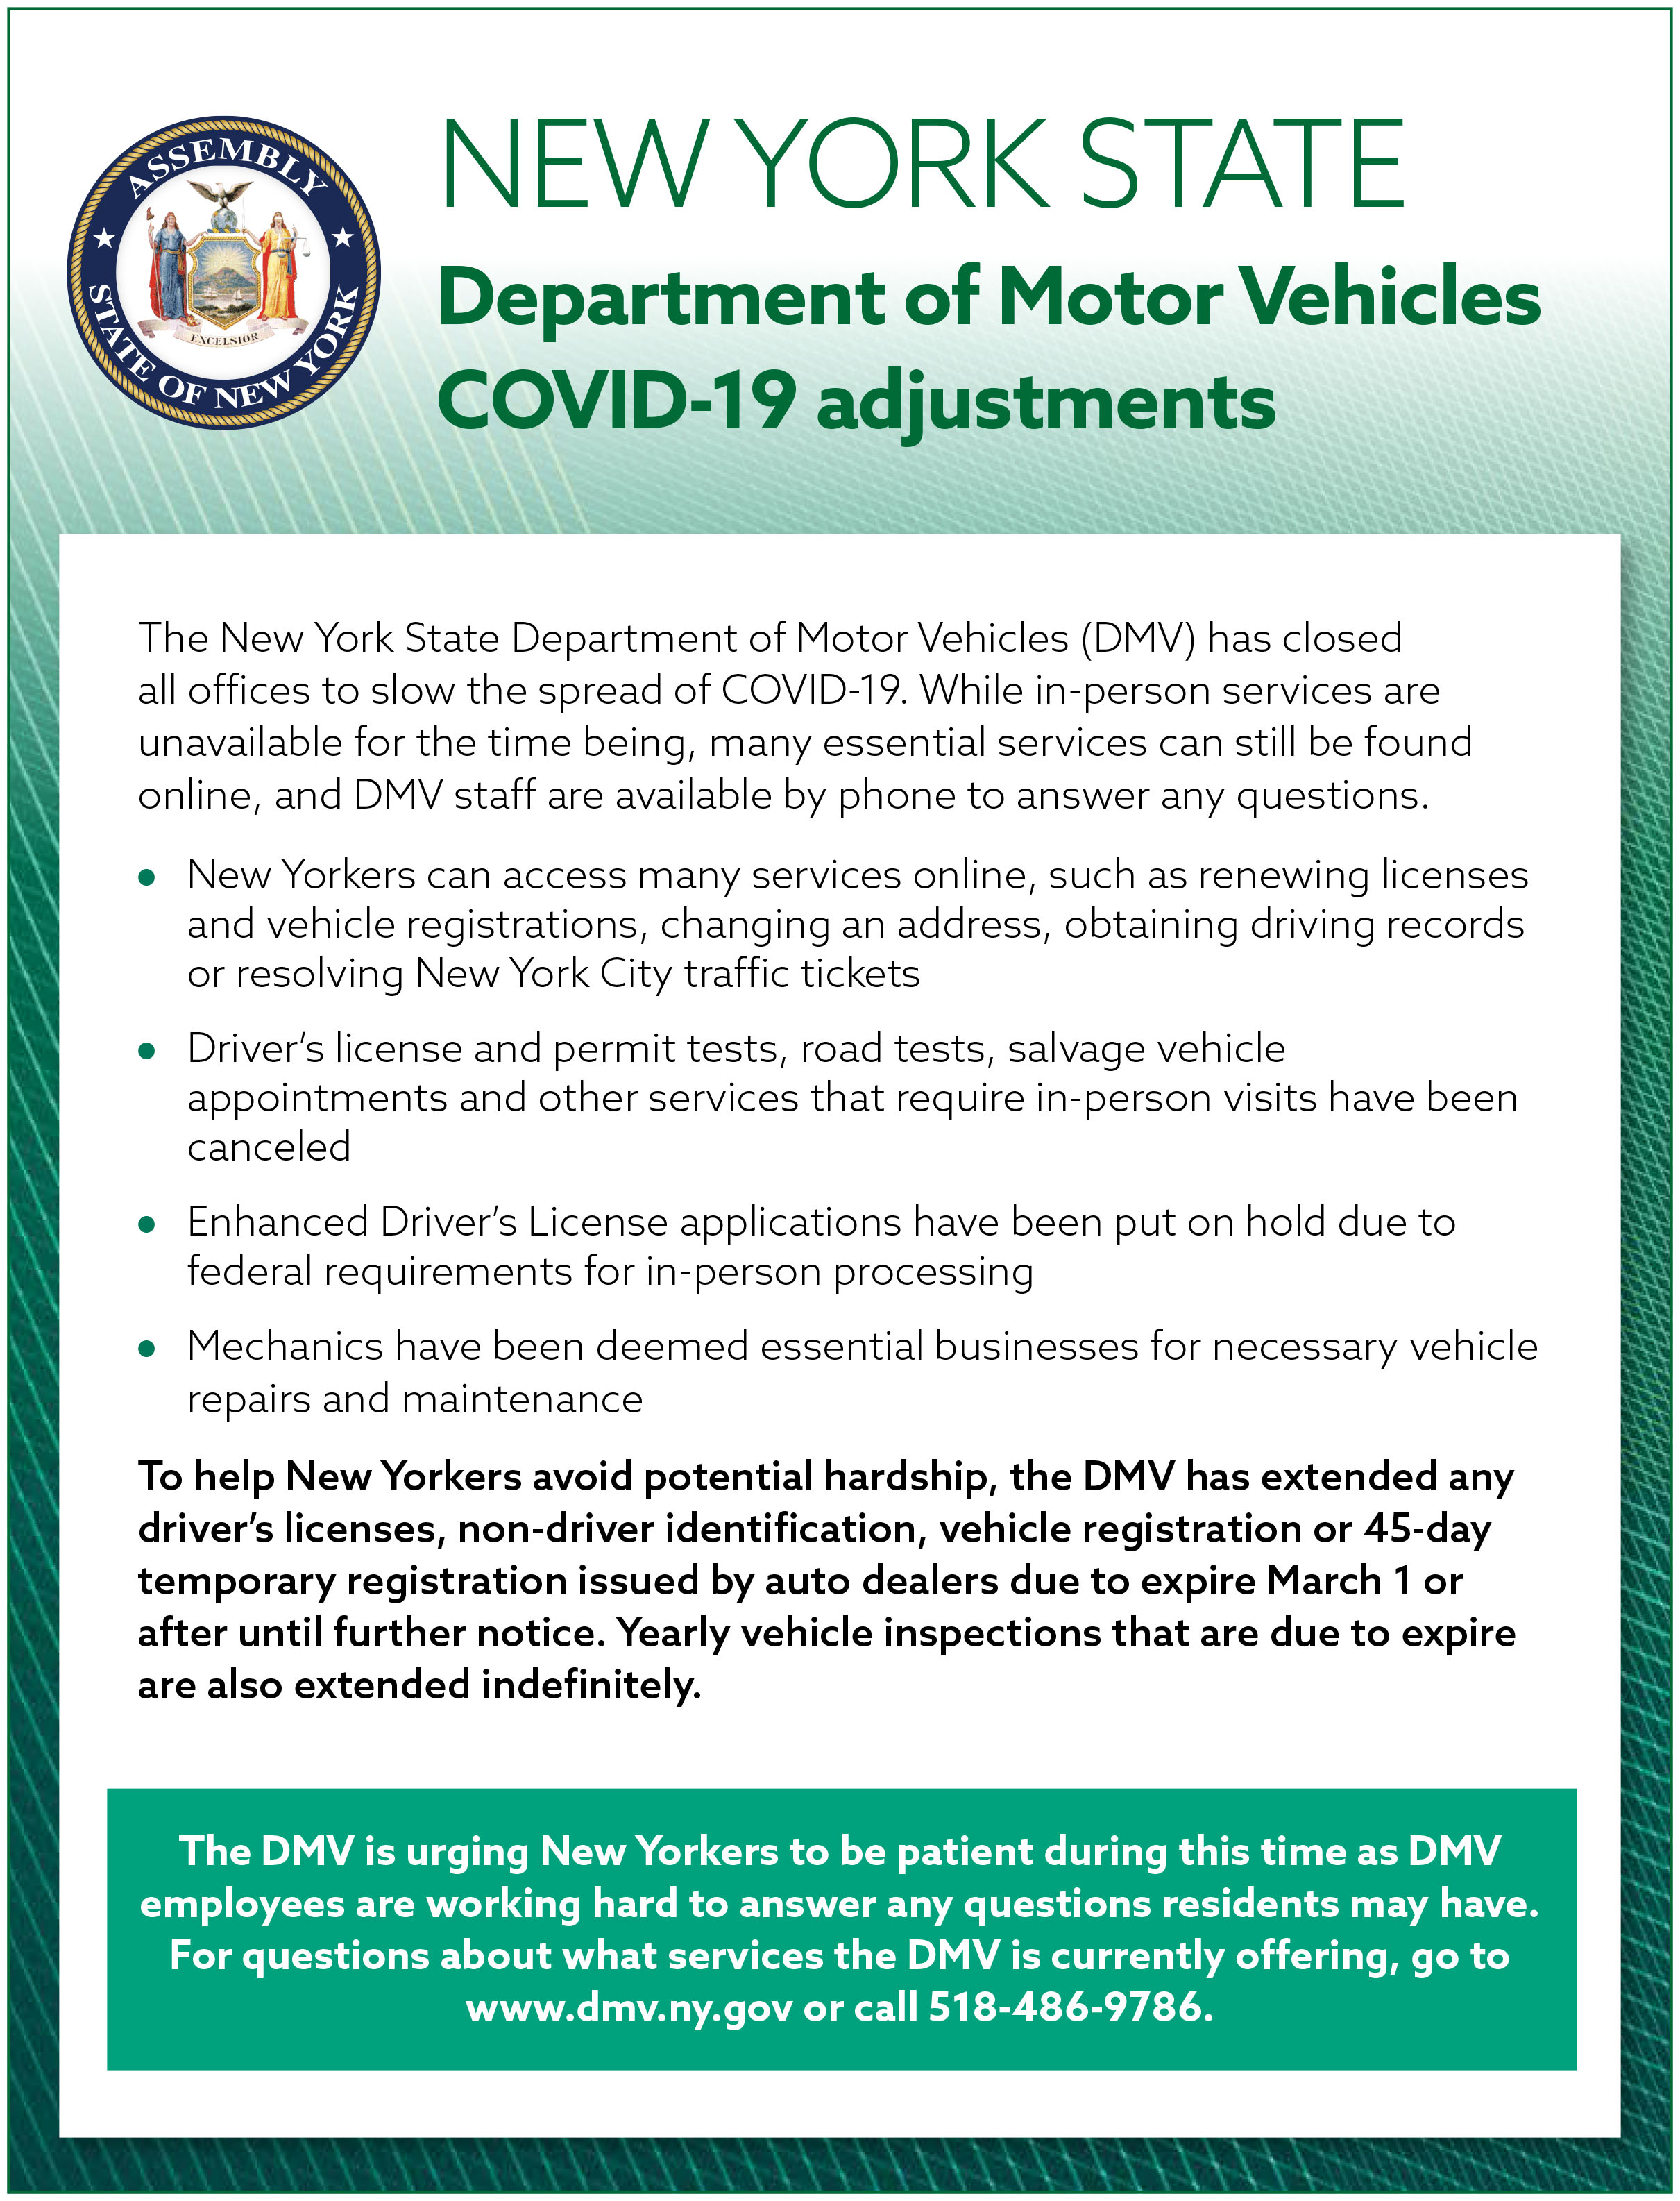 Department of Motor Vehicles COVID-19 Adjustments